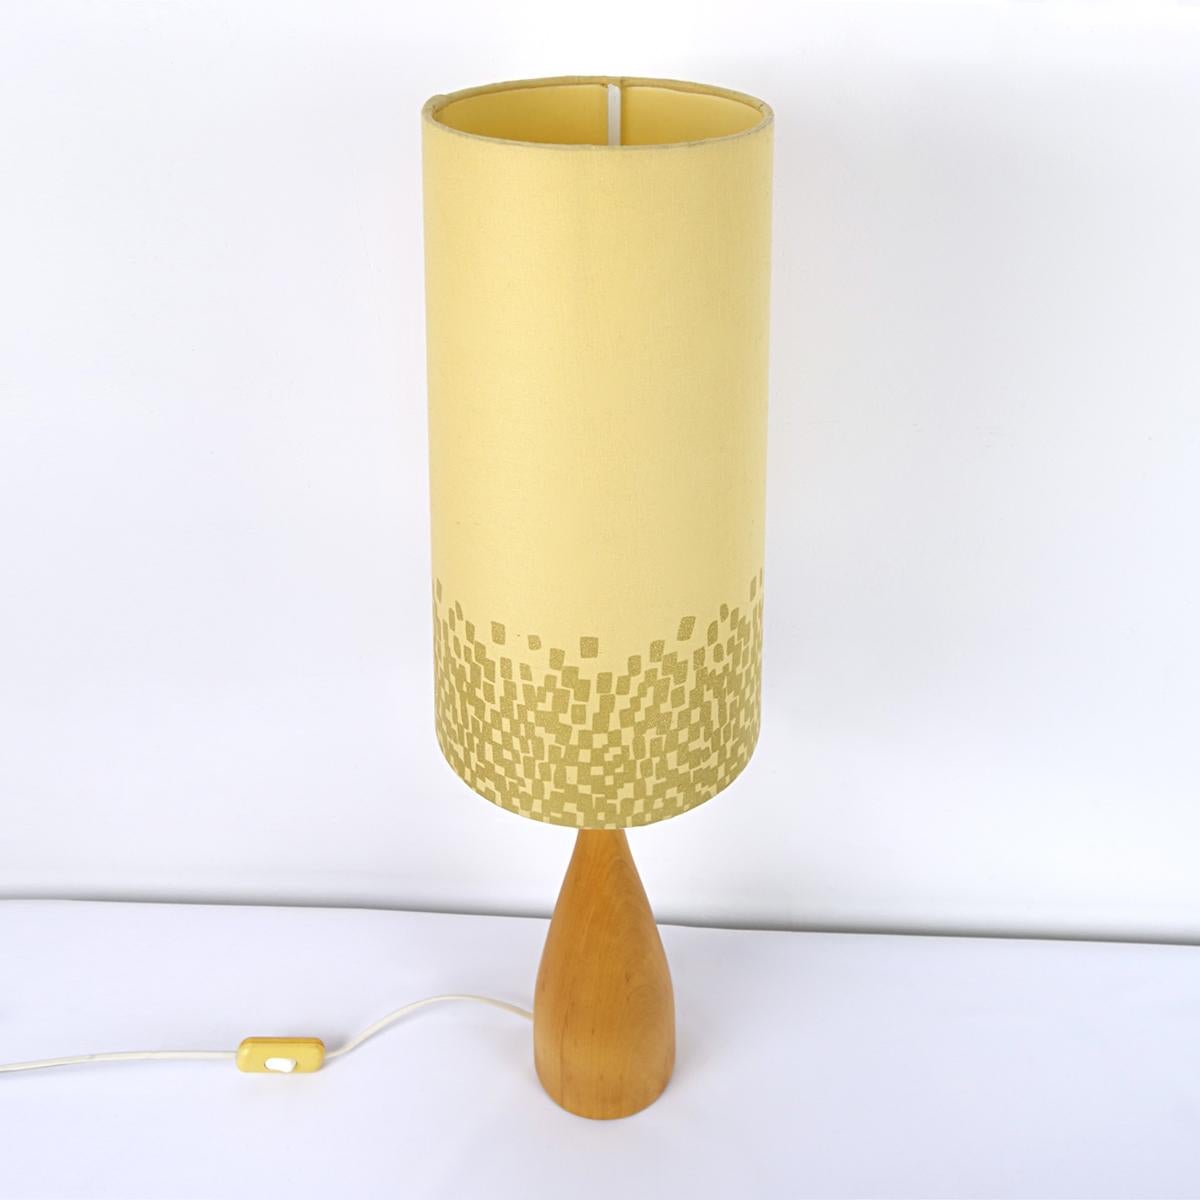 This elegantly shaped lamp foot has a slim waist and carries a soft yellow conic shade of which the bottom part is set with square gold colored cubes in a random pattern. 
The lamp is marked underneath the foot: Nr. 041. There is also a stamp which